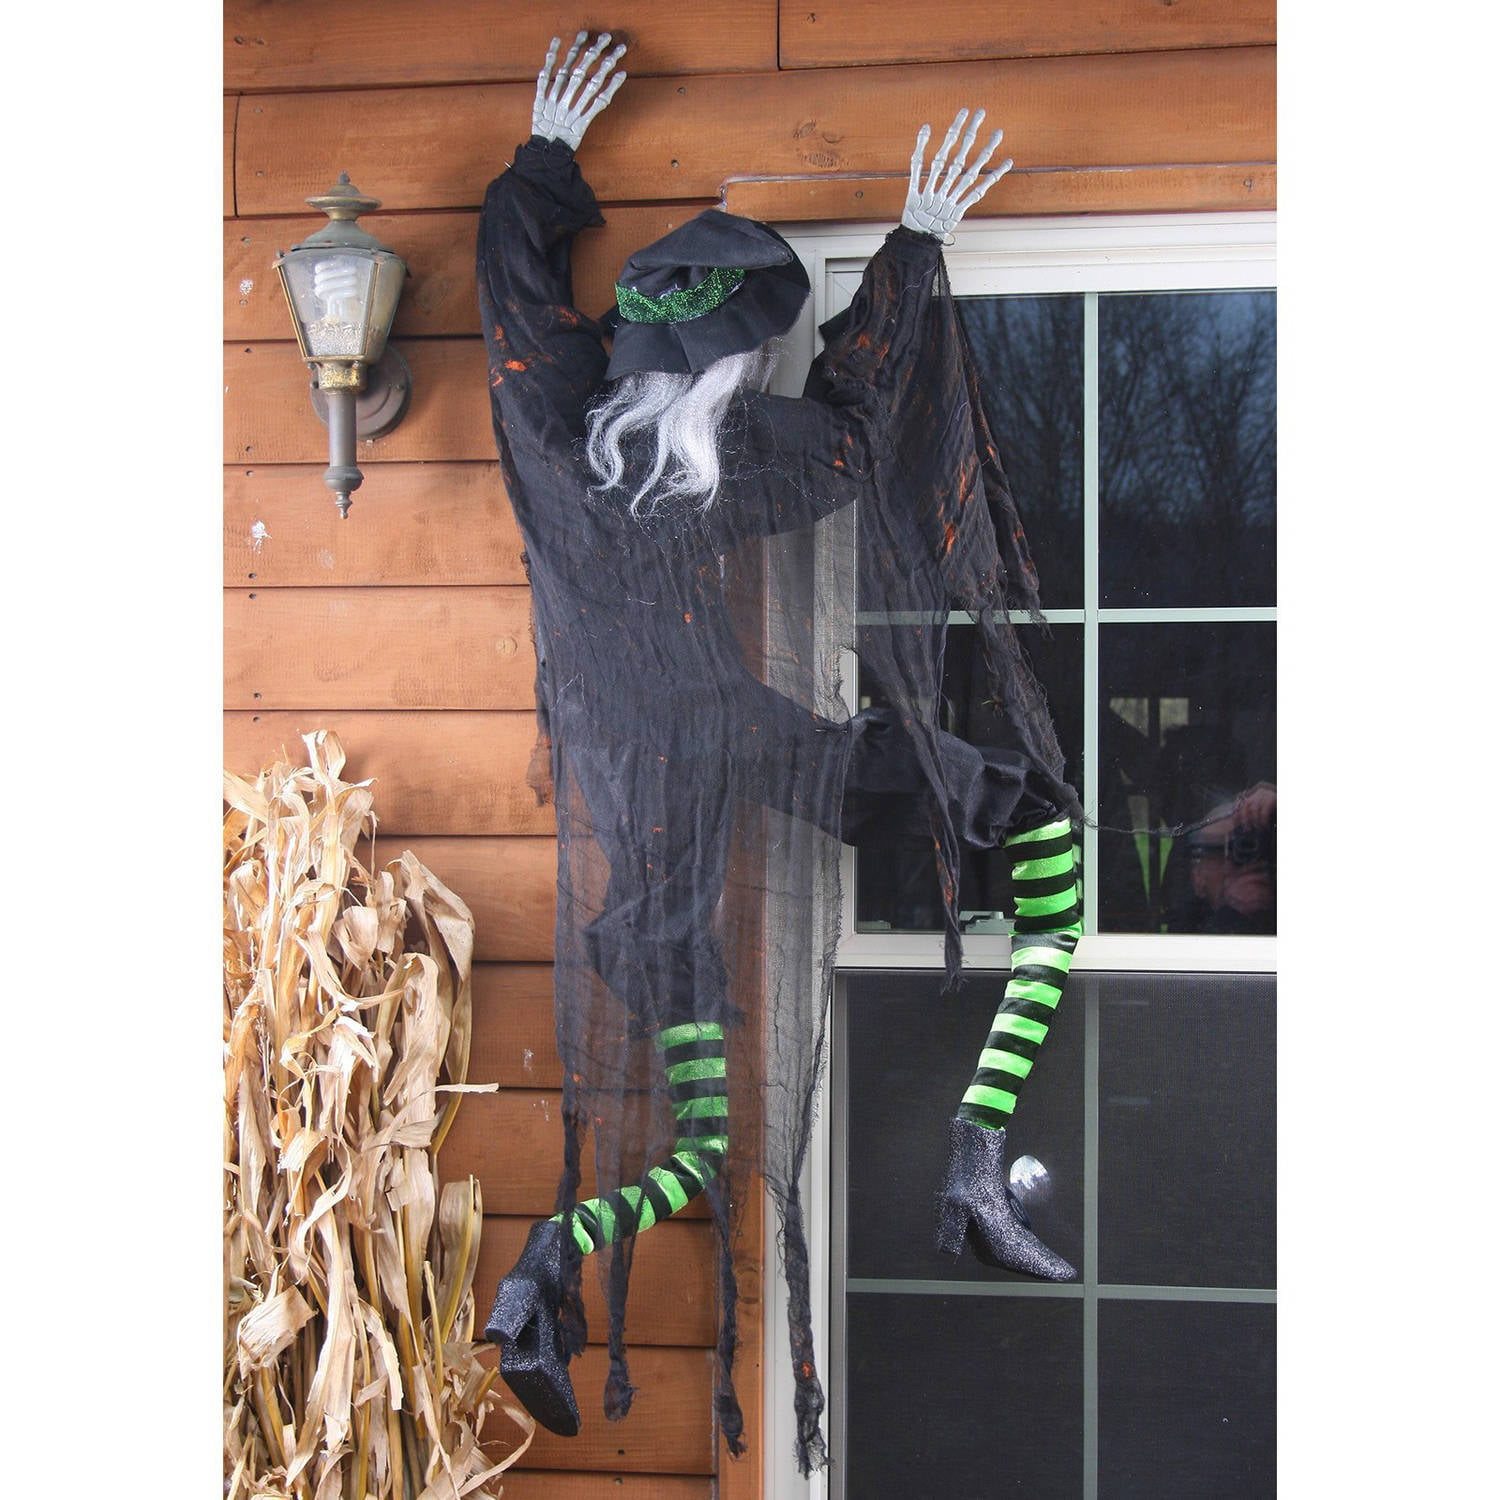 HALLOWEEN FULL SIZE LIFE SIZE DUMMY W/ HANDS 6 FT PROP DECORATION CEMETARY 